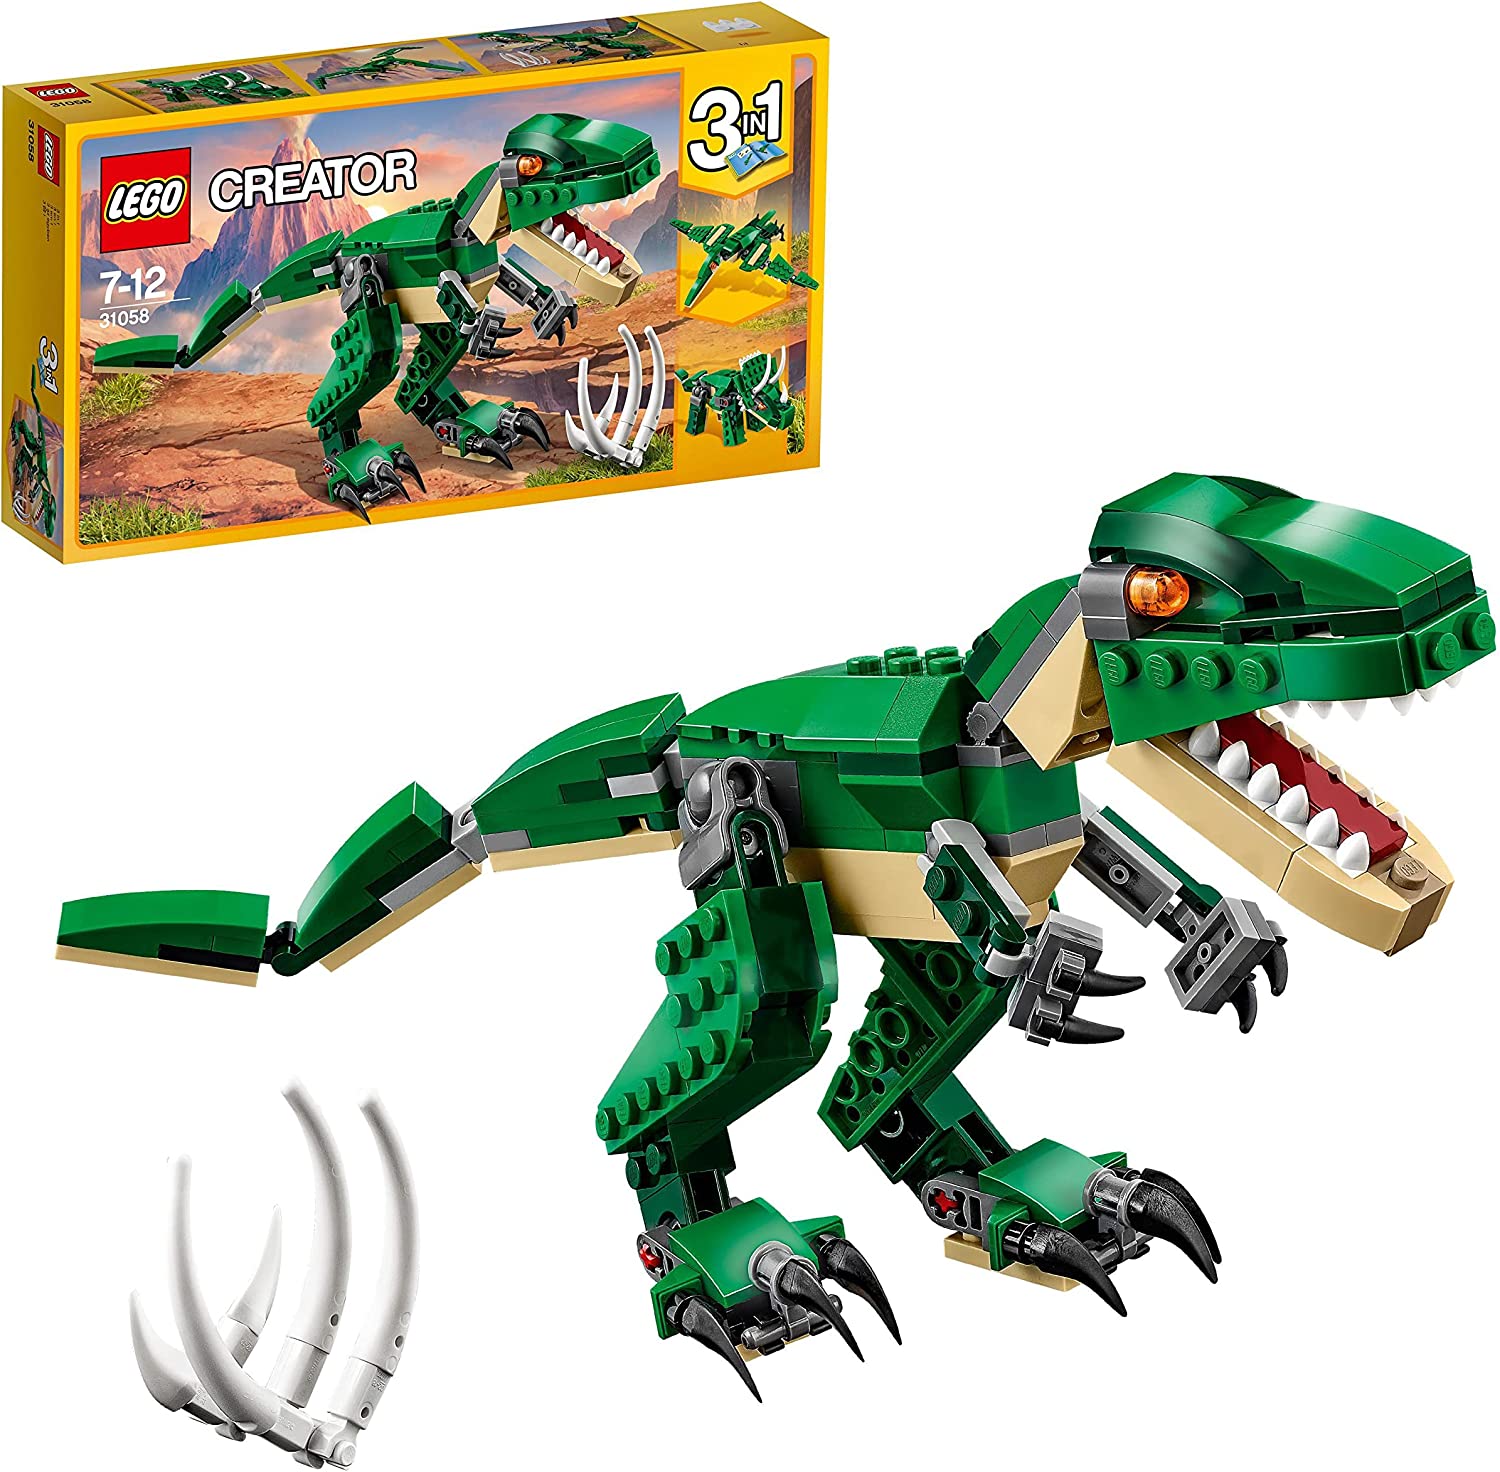 Best dinosaur lego sets for adults and children - Discover Wildlife